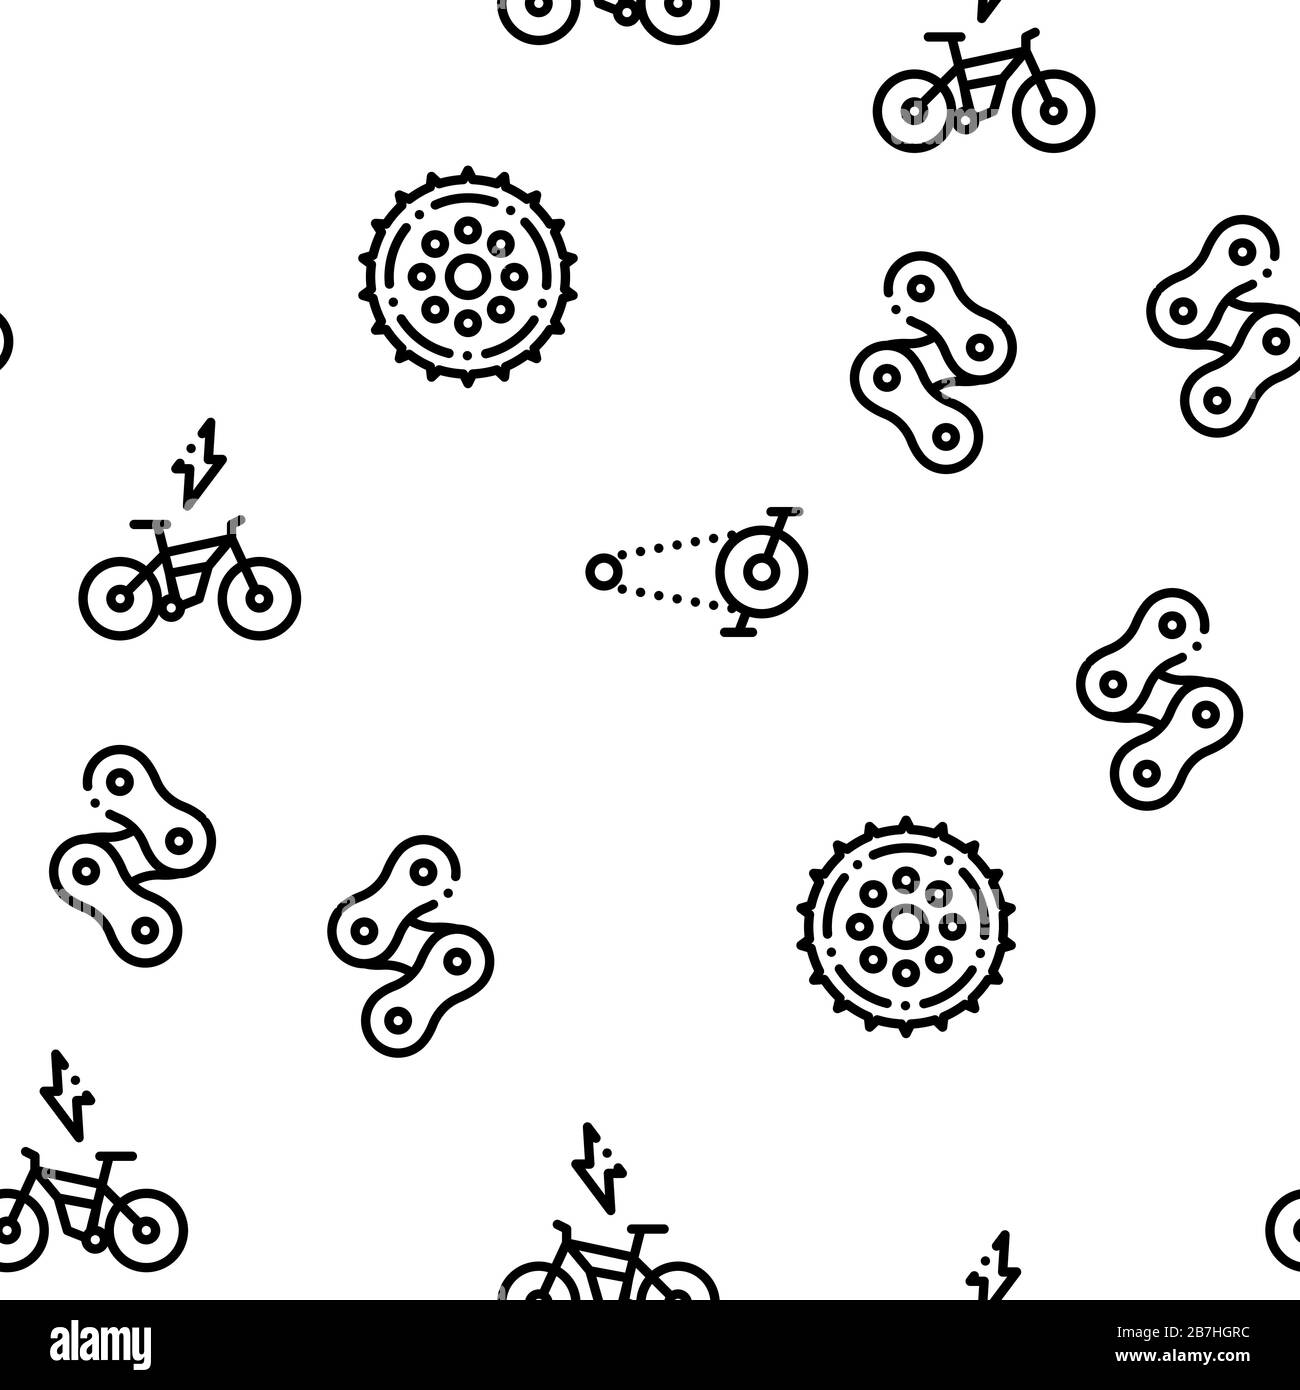 Bicycle Bike Details Seamless Pattern Vector Stock Vector